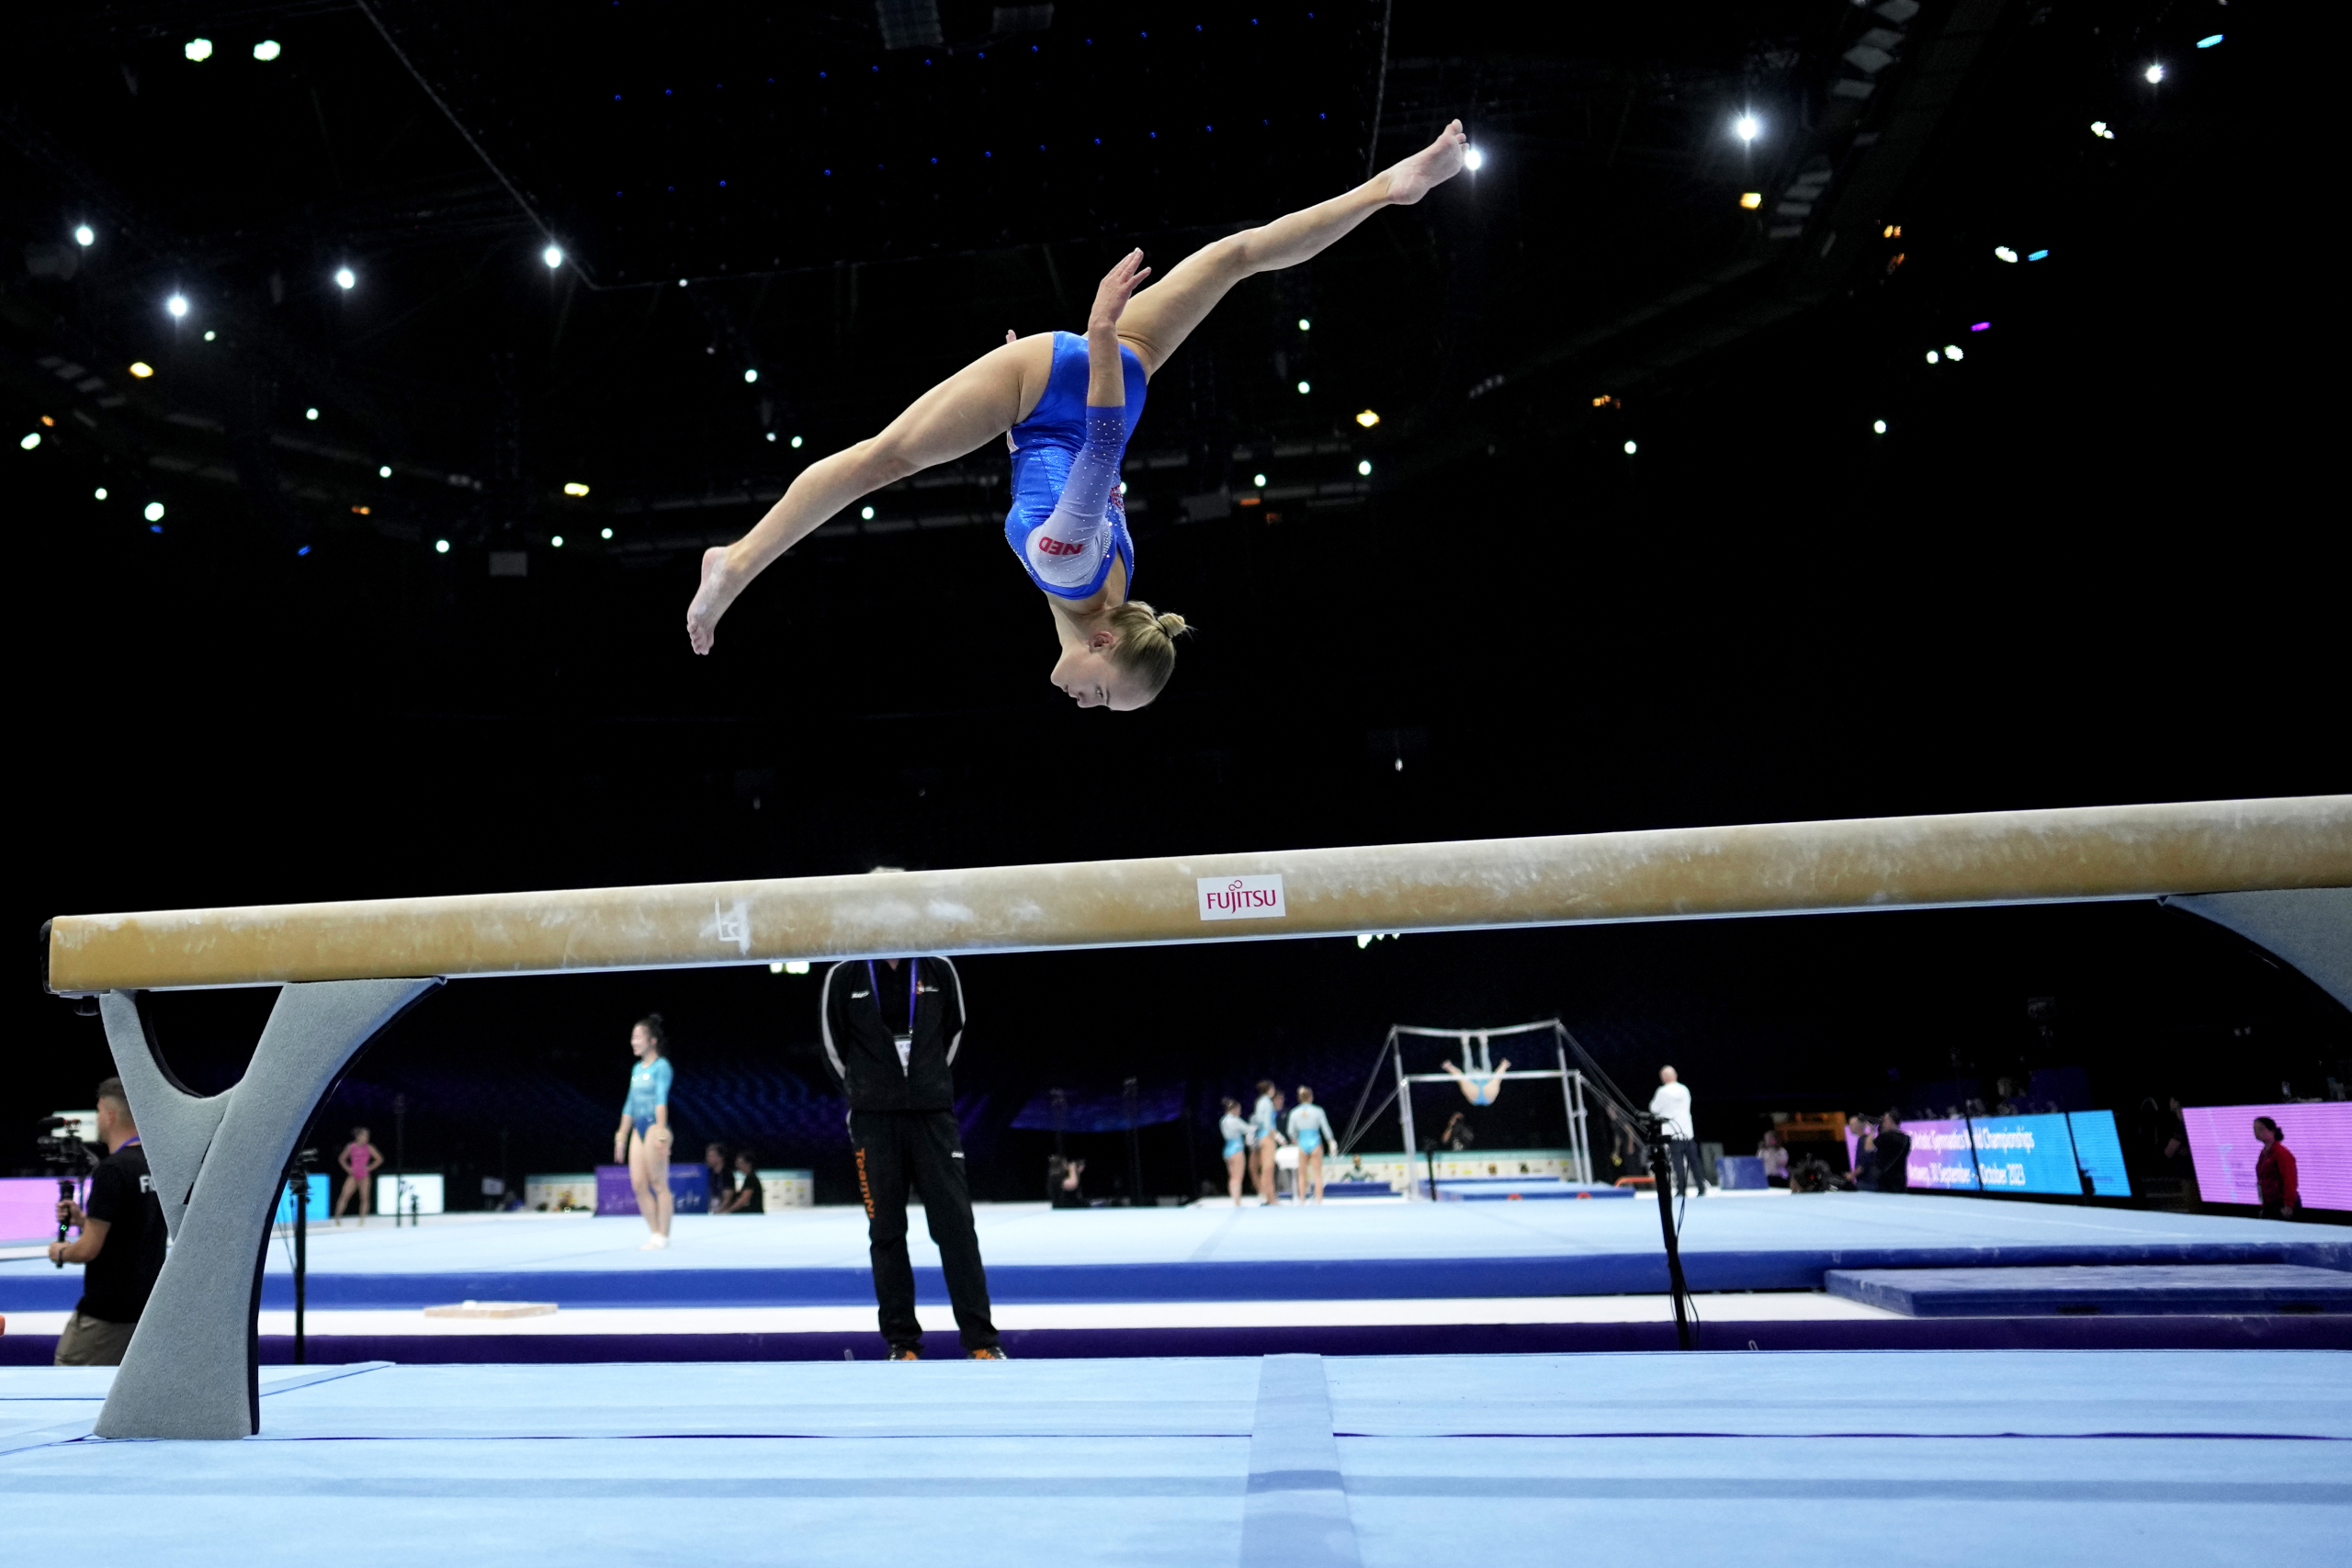 Netherland's Sanne Wevers practices on the balance beam during podium training at the Artistic Gymnastics World Championships in Antwerp, Belgium, Thursday, Sept. 28, 2023. The event will take place until Sunday, Oct. 8. (AP Photo/Virginia Mayo)